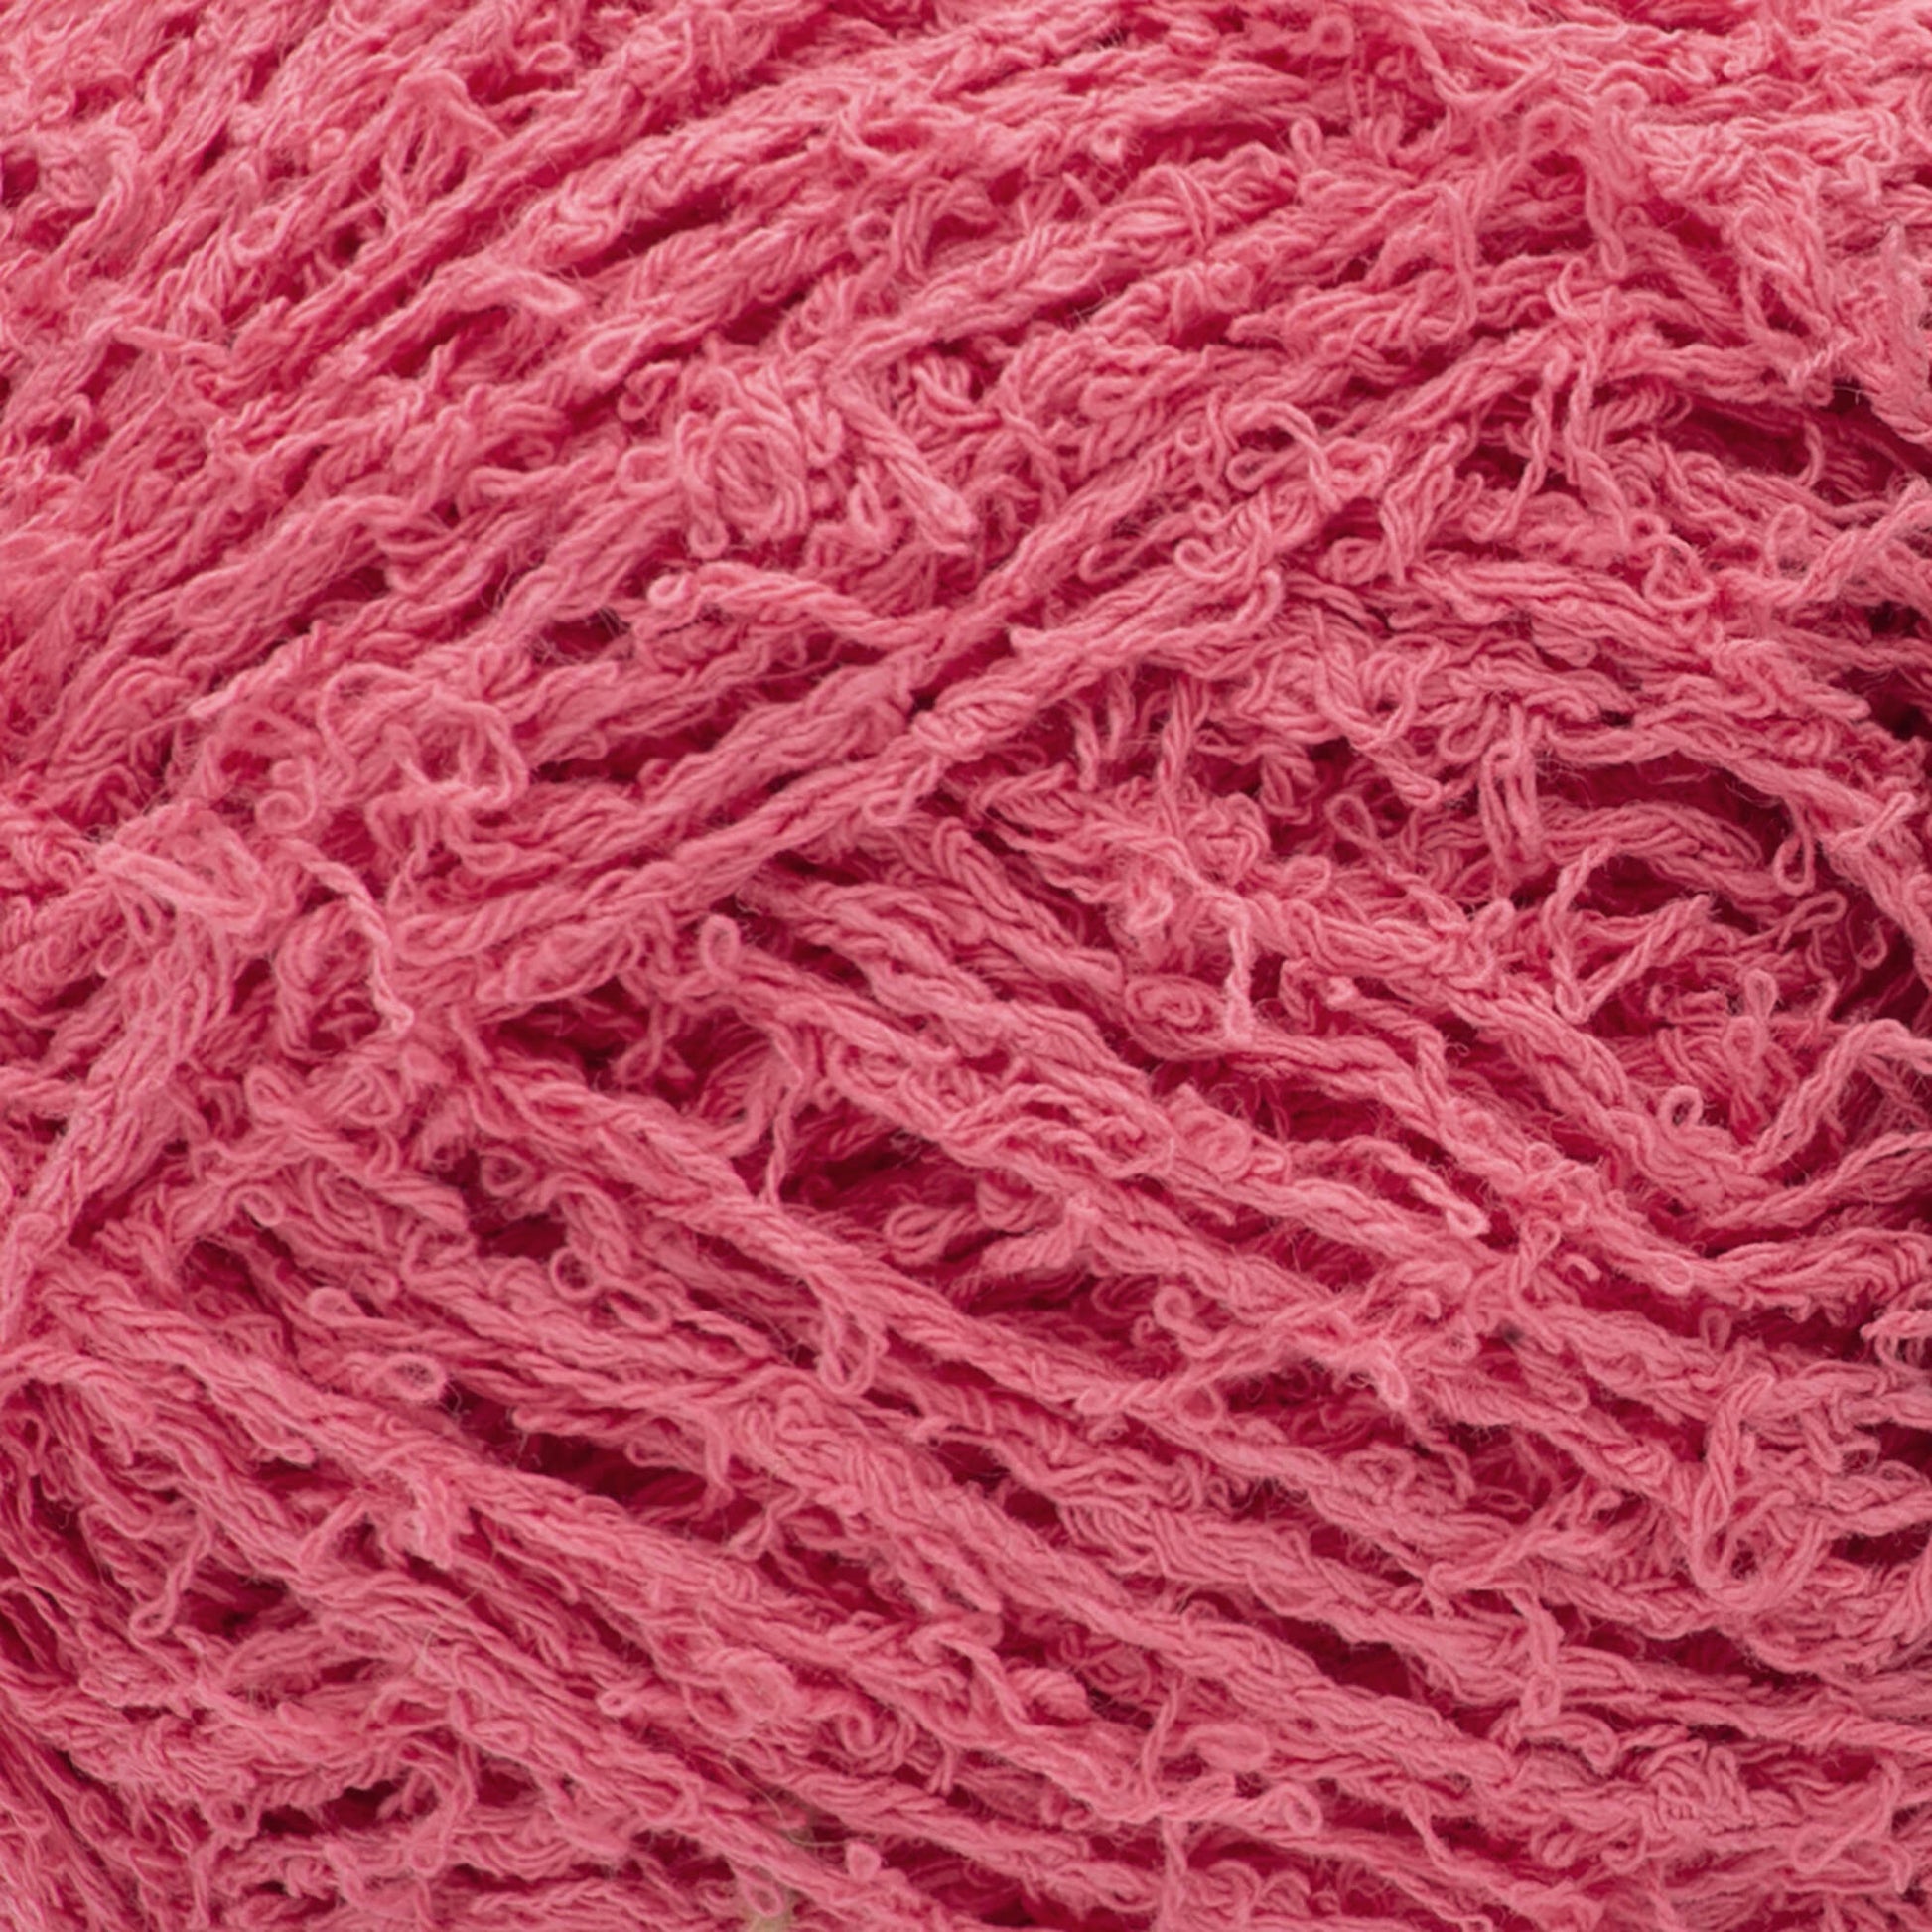 Red Heart Scrubby Cotton Yarn - Discontinued Shades